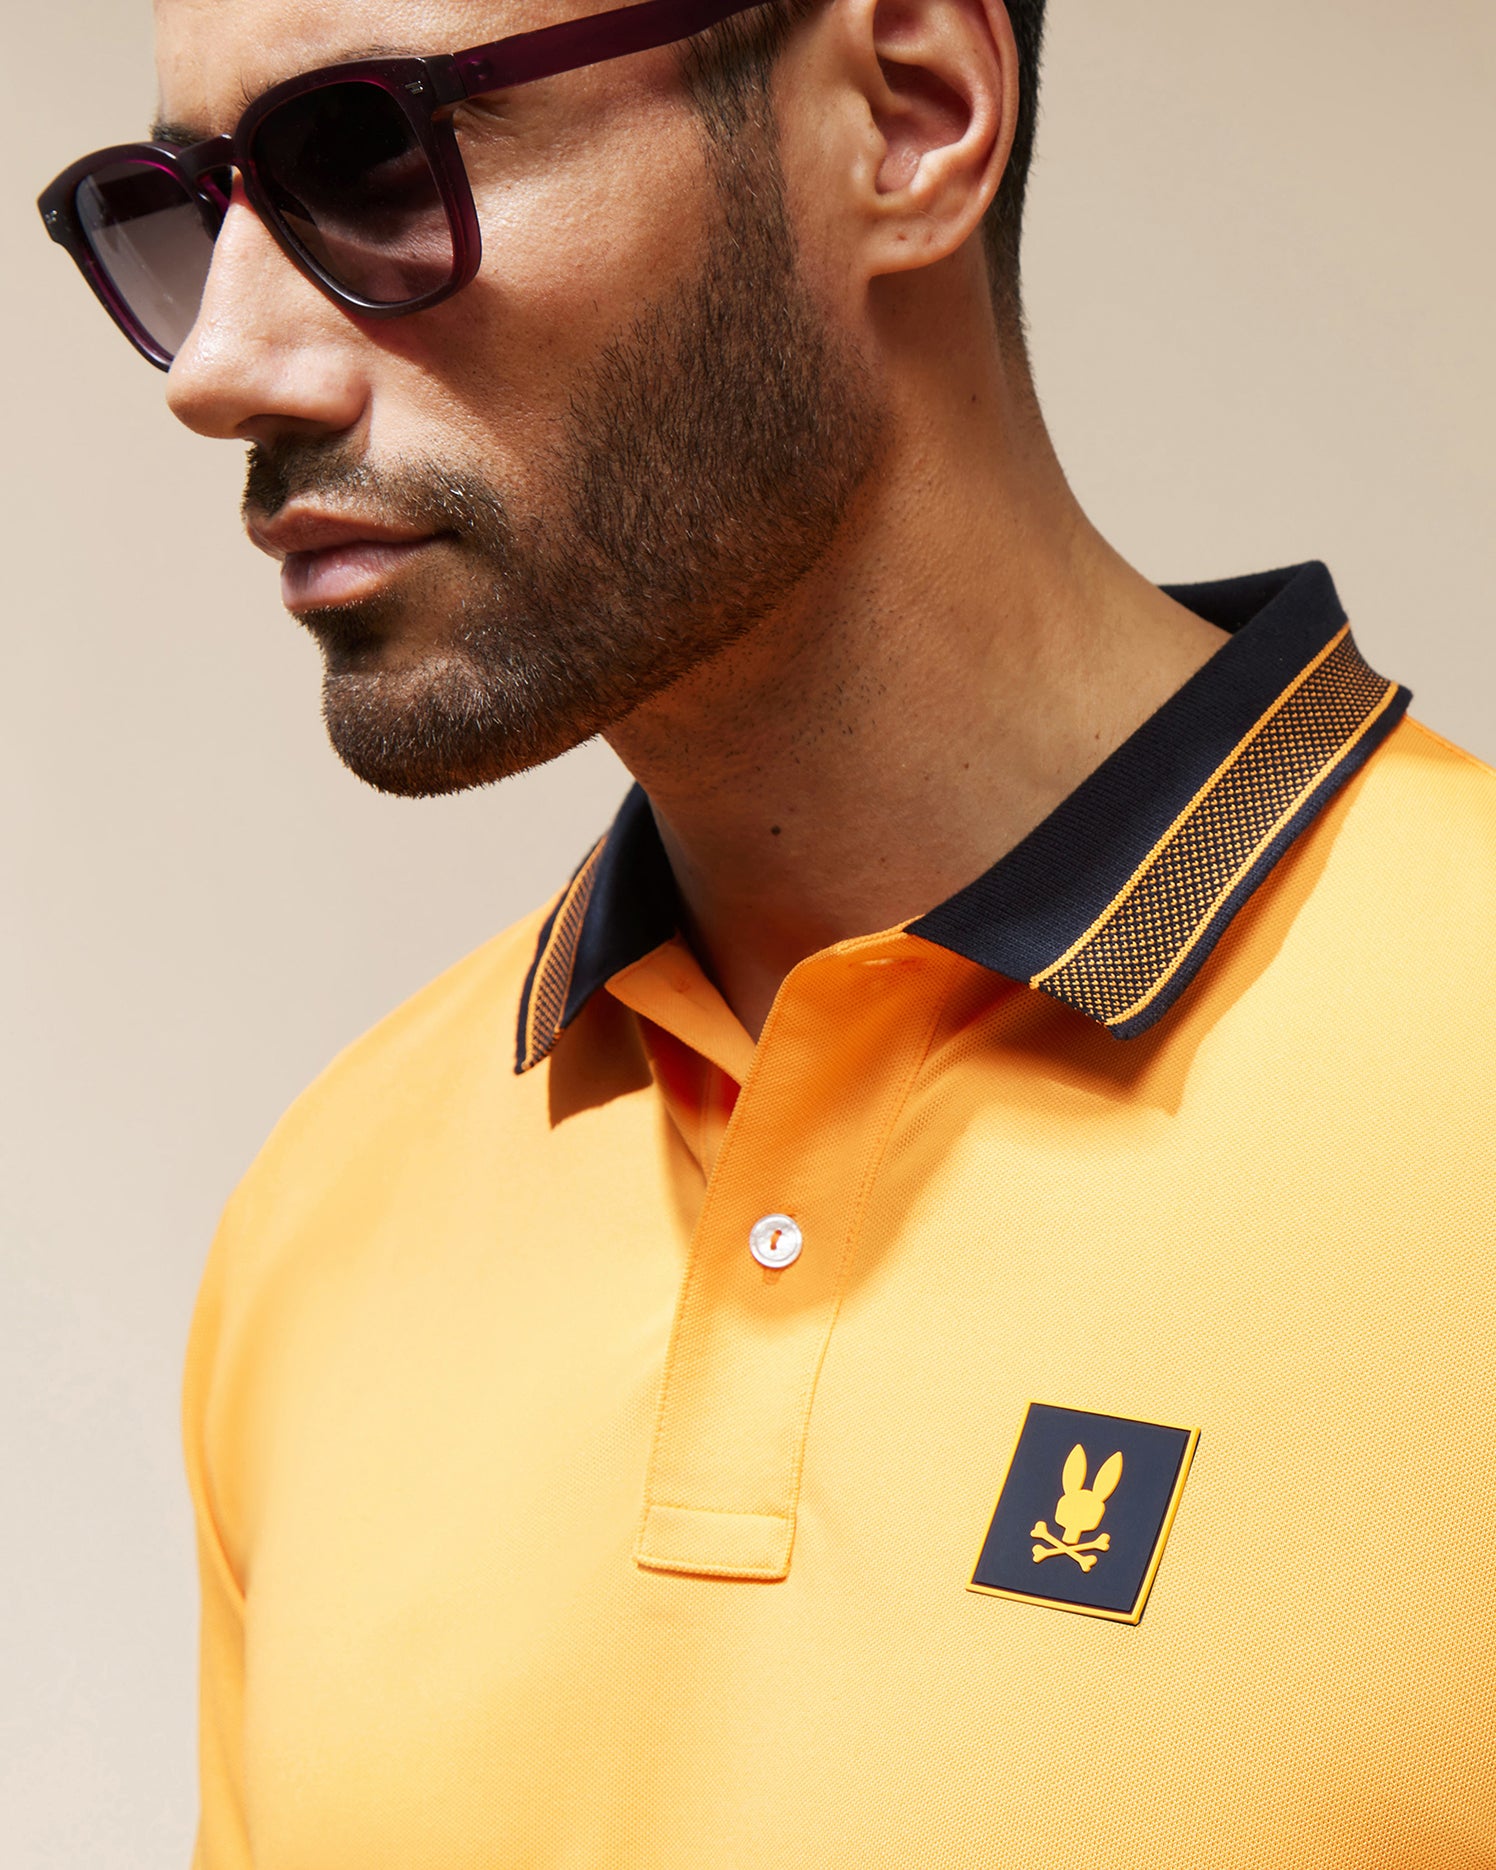 A man with a dark beard, wearing sport-forward sunglasses and an orange MENS TARRYTOWN SPORT POLO - B6K333B200 from Psycho Bunny, featuring a black and yellow collar, gazes to the side. The polo, made of breathable material, showcases a bunny head with crossbones on the chest. The background is a neutral tone.